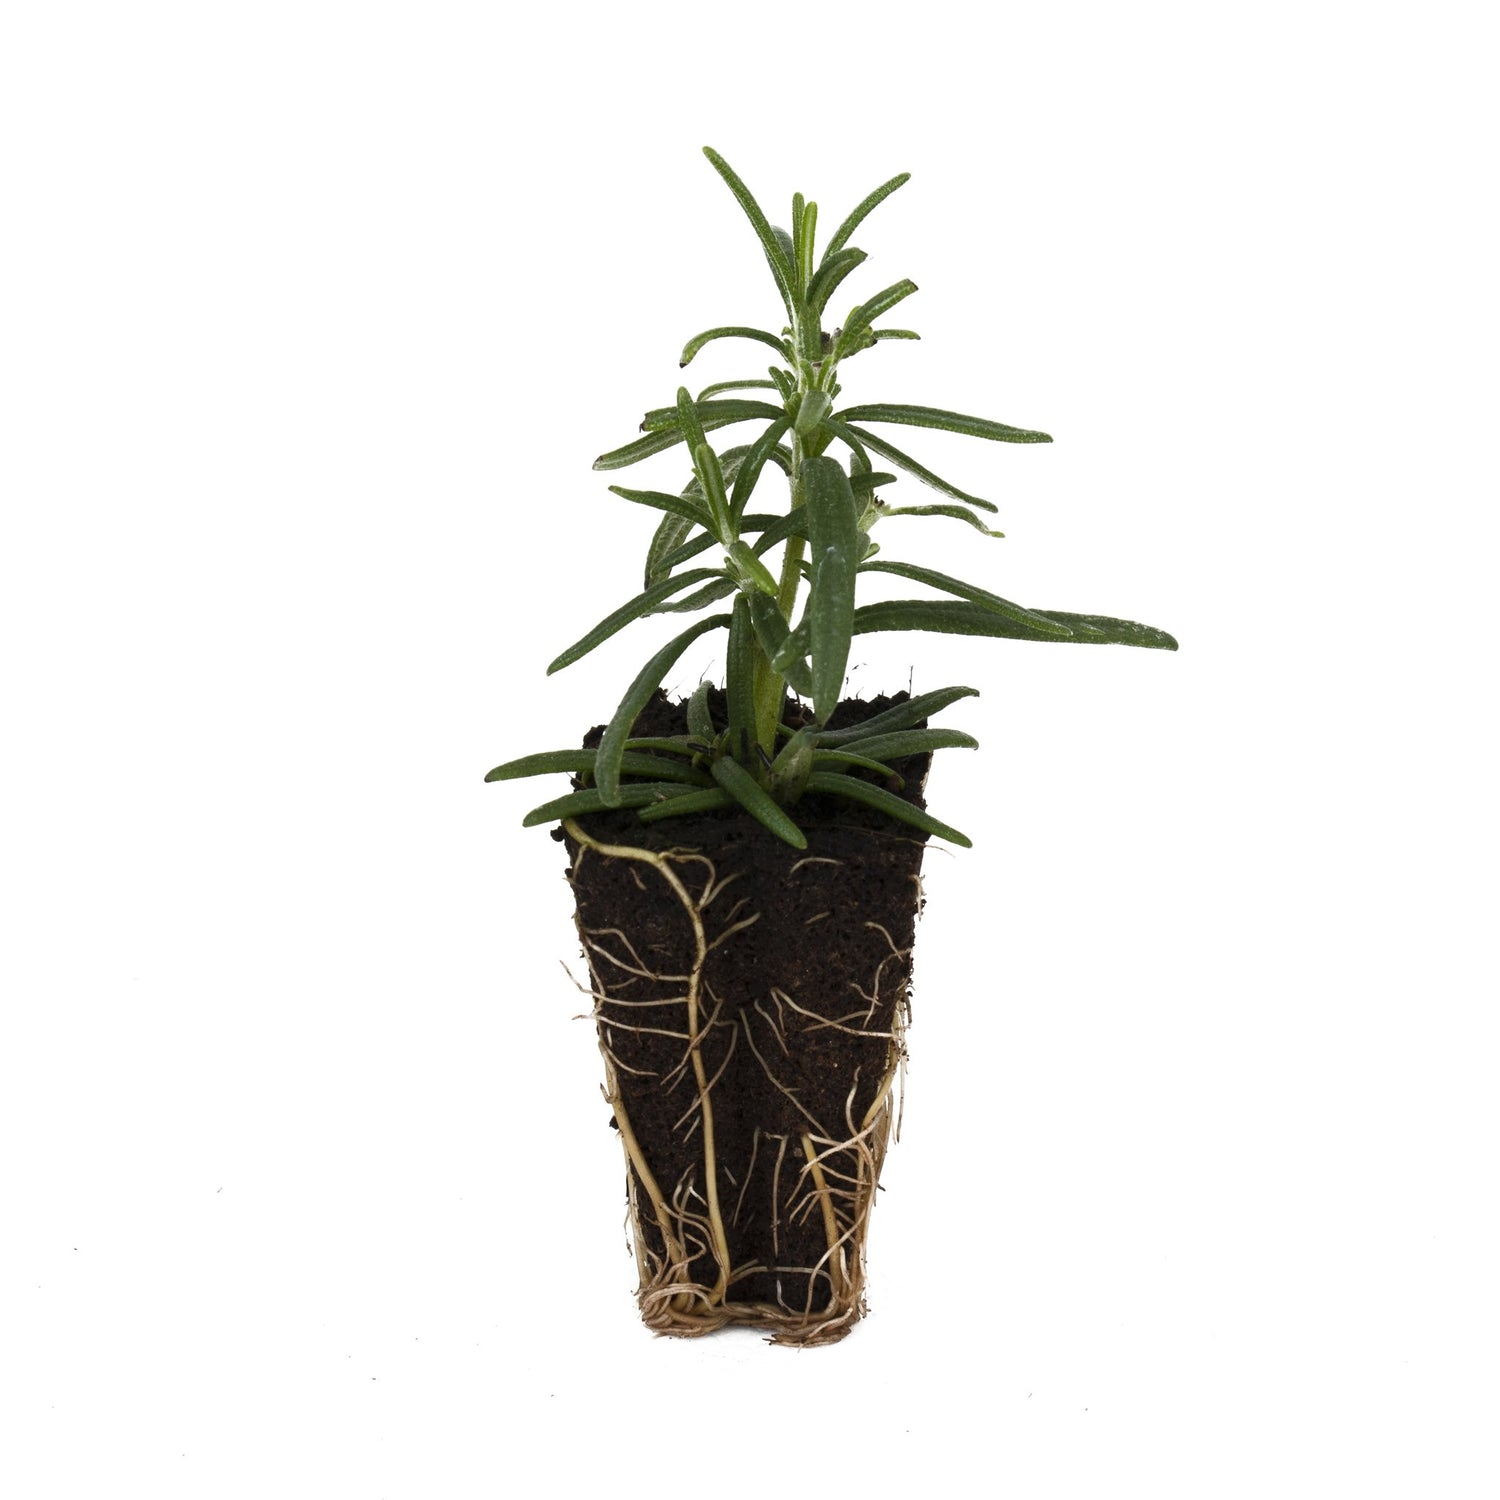 Prostrate Rosemary Herb Plant